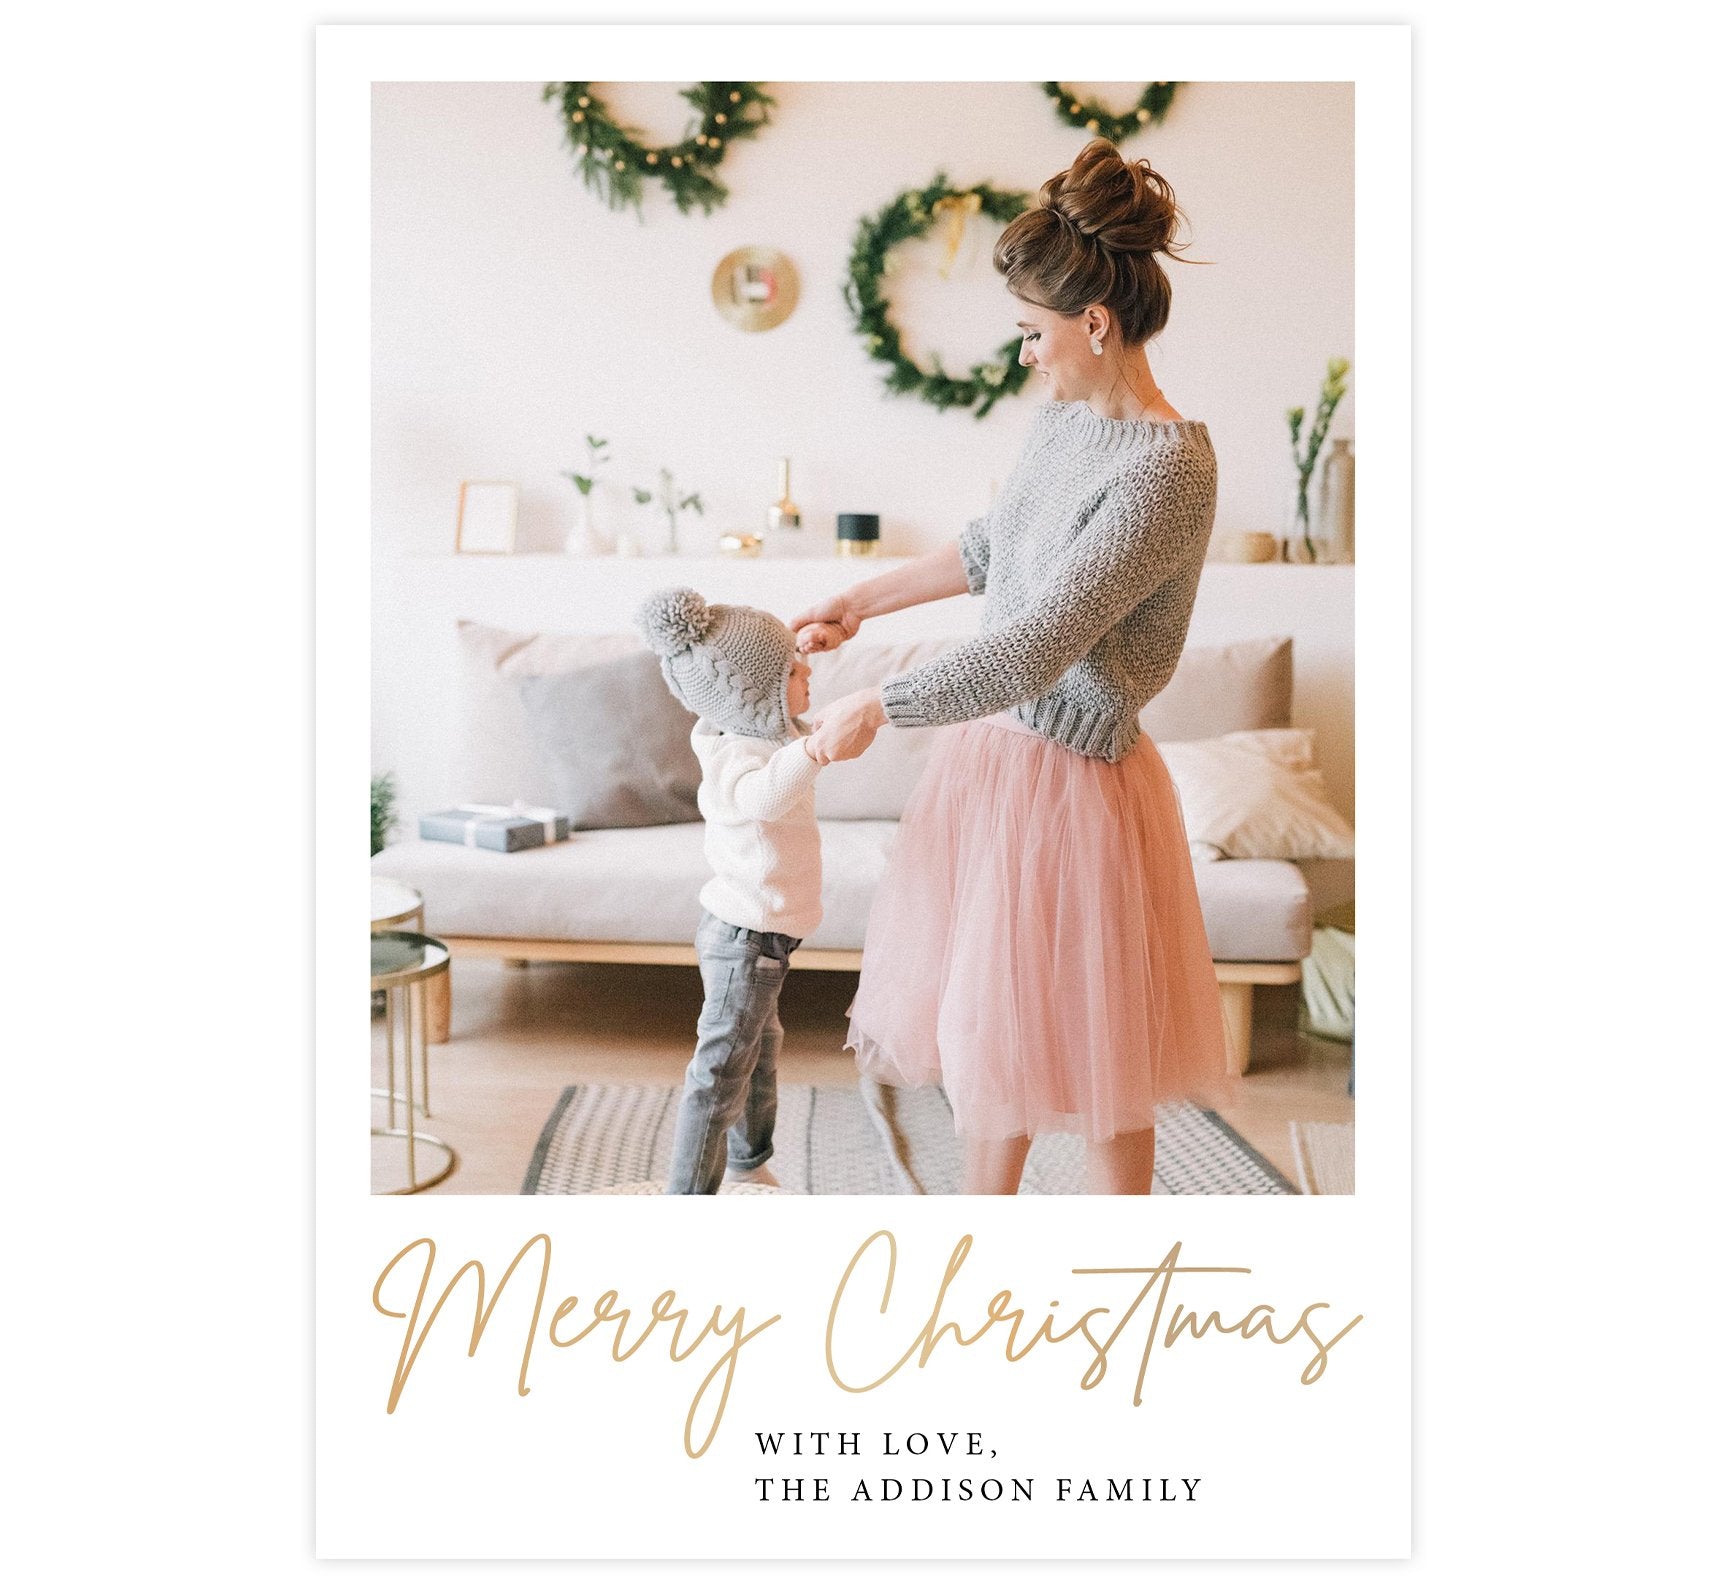 Simple Christmas Holiday Card; White background with one large image spot and gold "Merry Christmas" under the image.